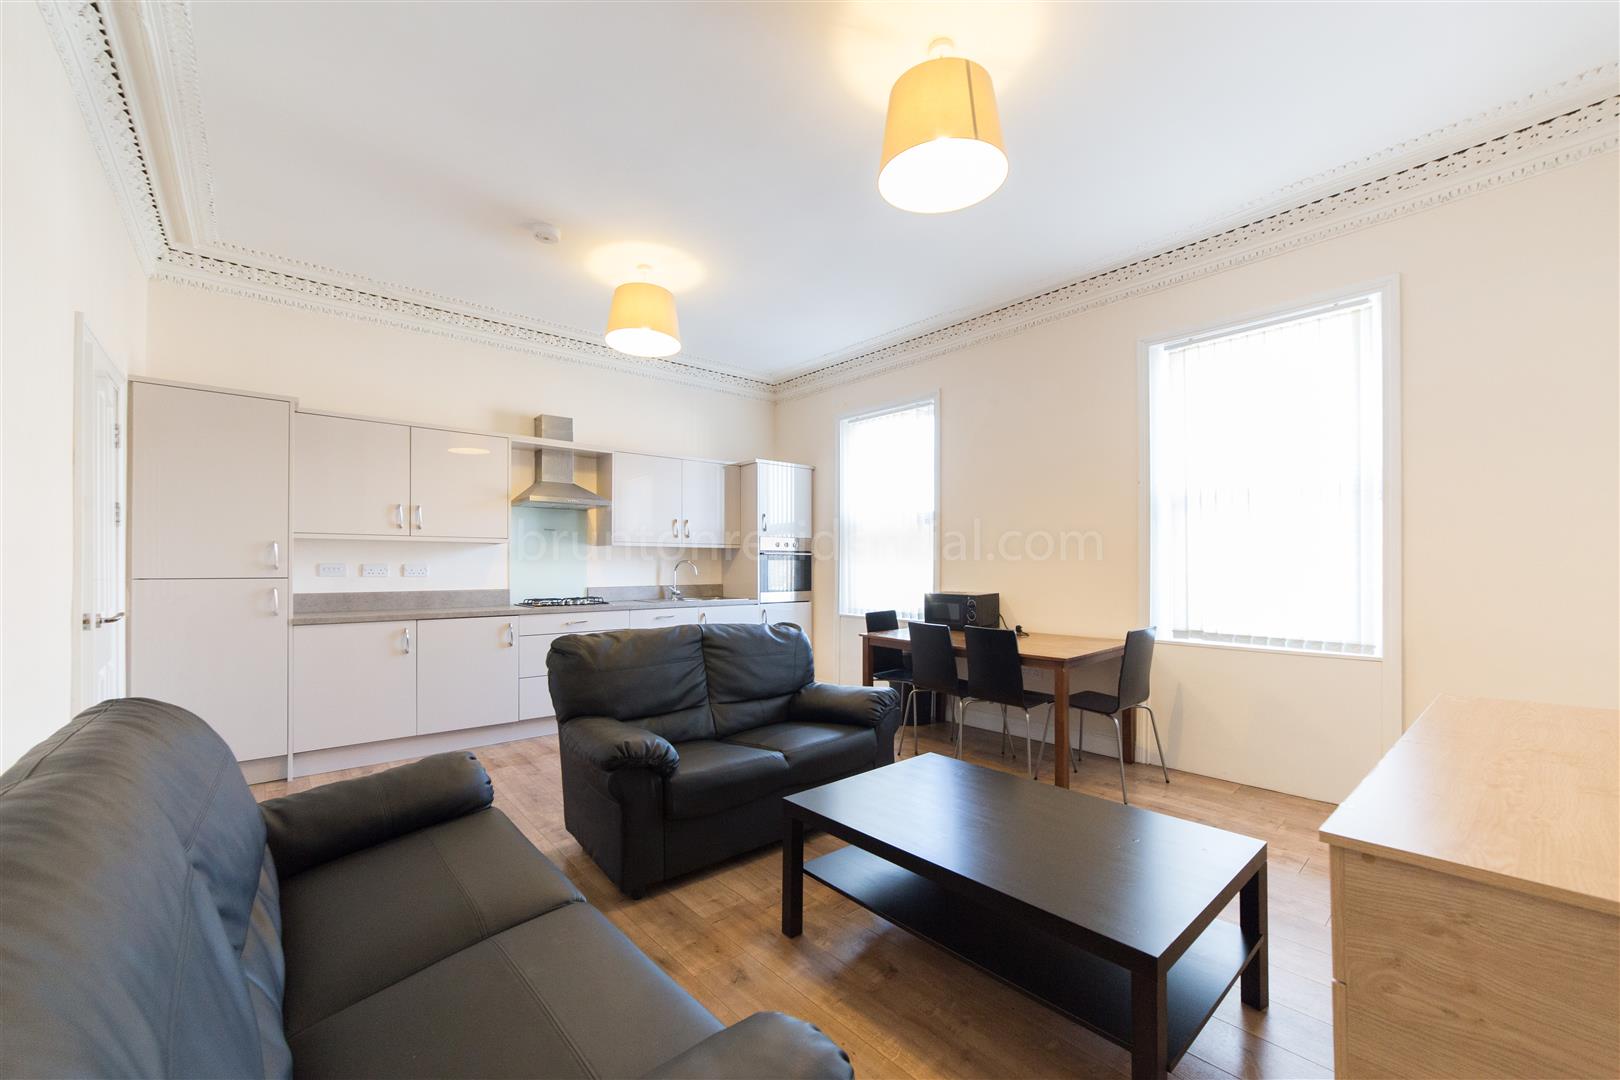 4 bed maisonette to rent in Chillingham Road, Newcastle Upon Tyne - Property Image 1